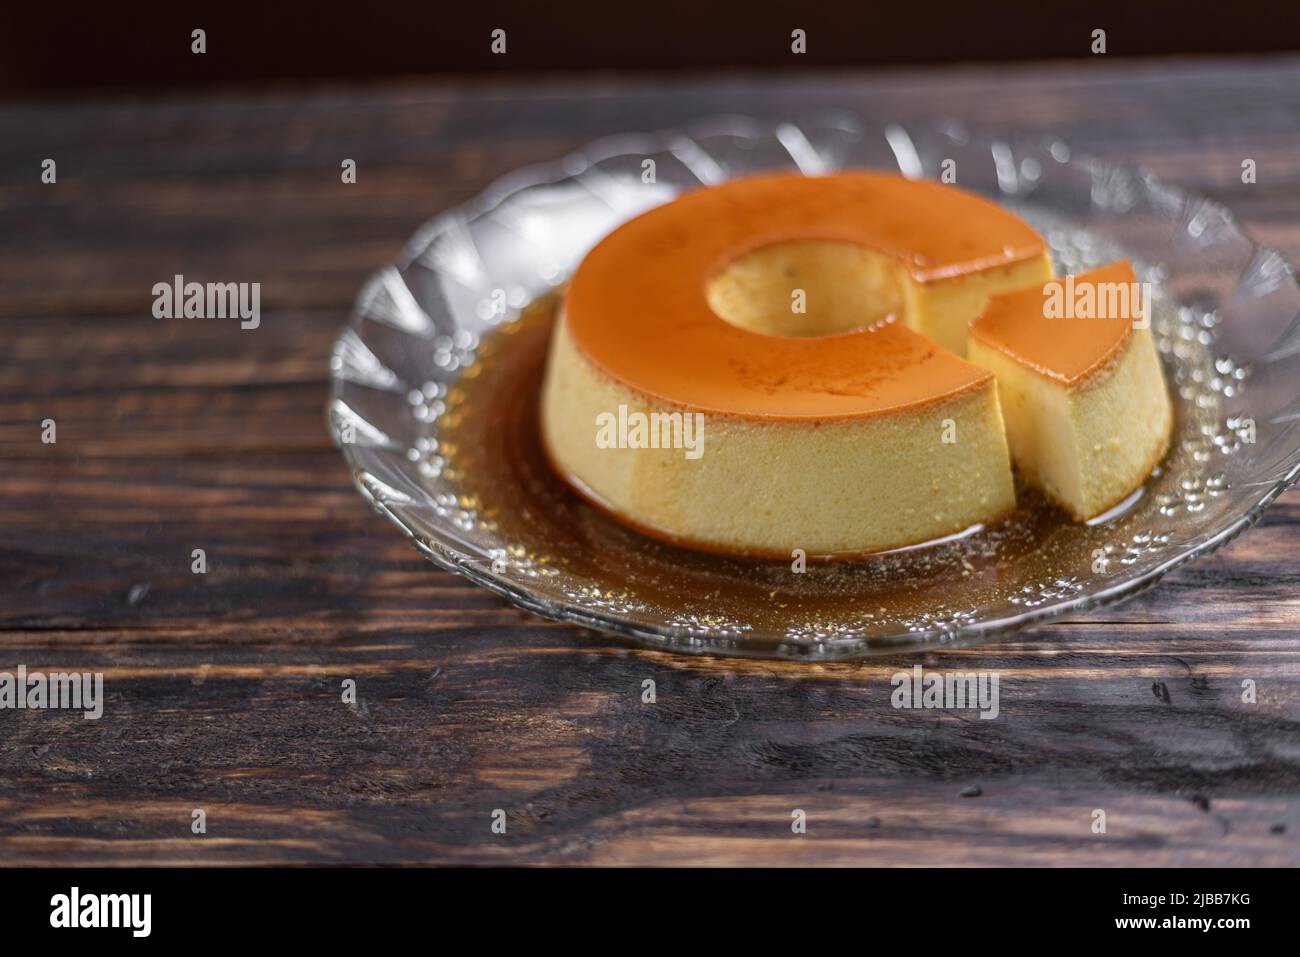 How To Make Pudim Brazilian Flan with Condensed Milk 